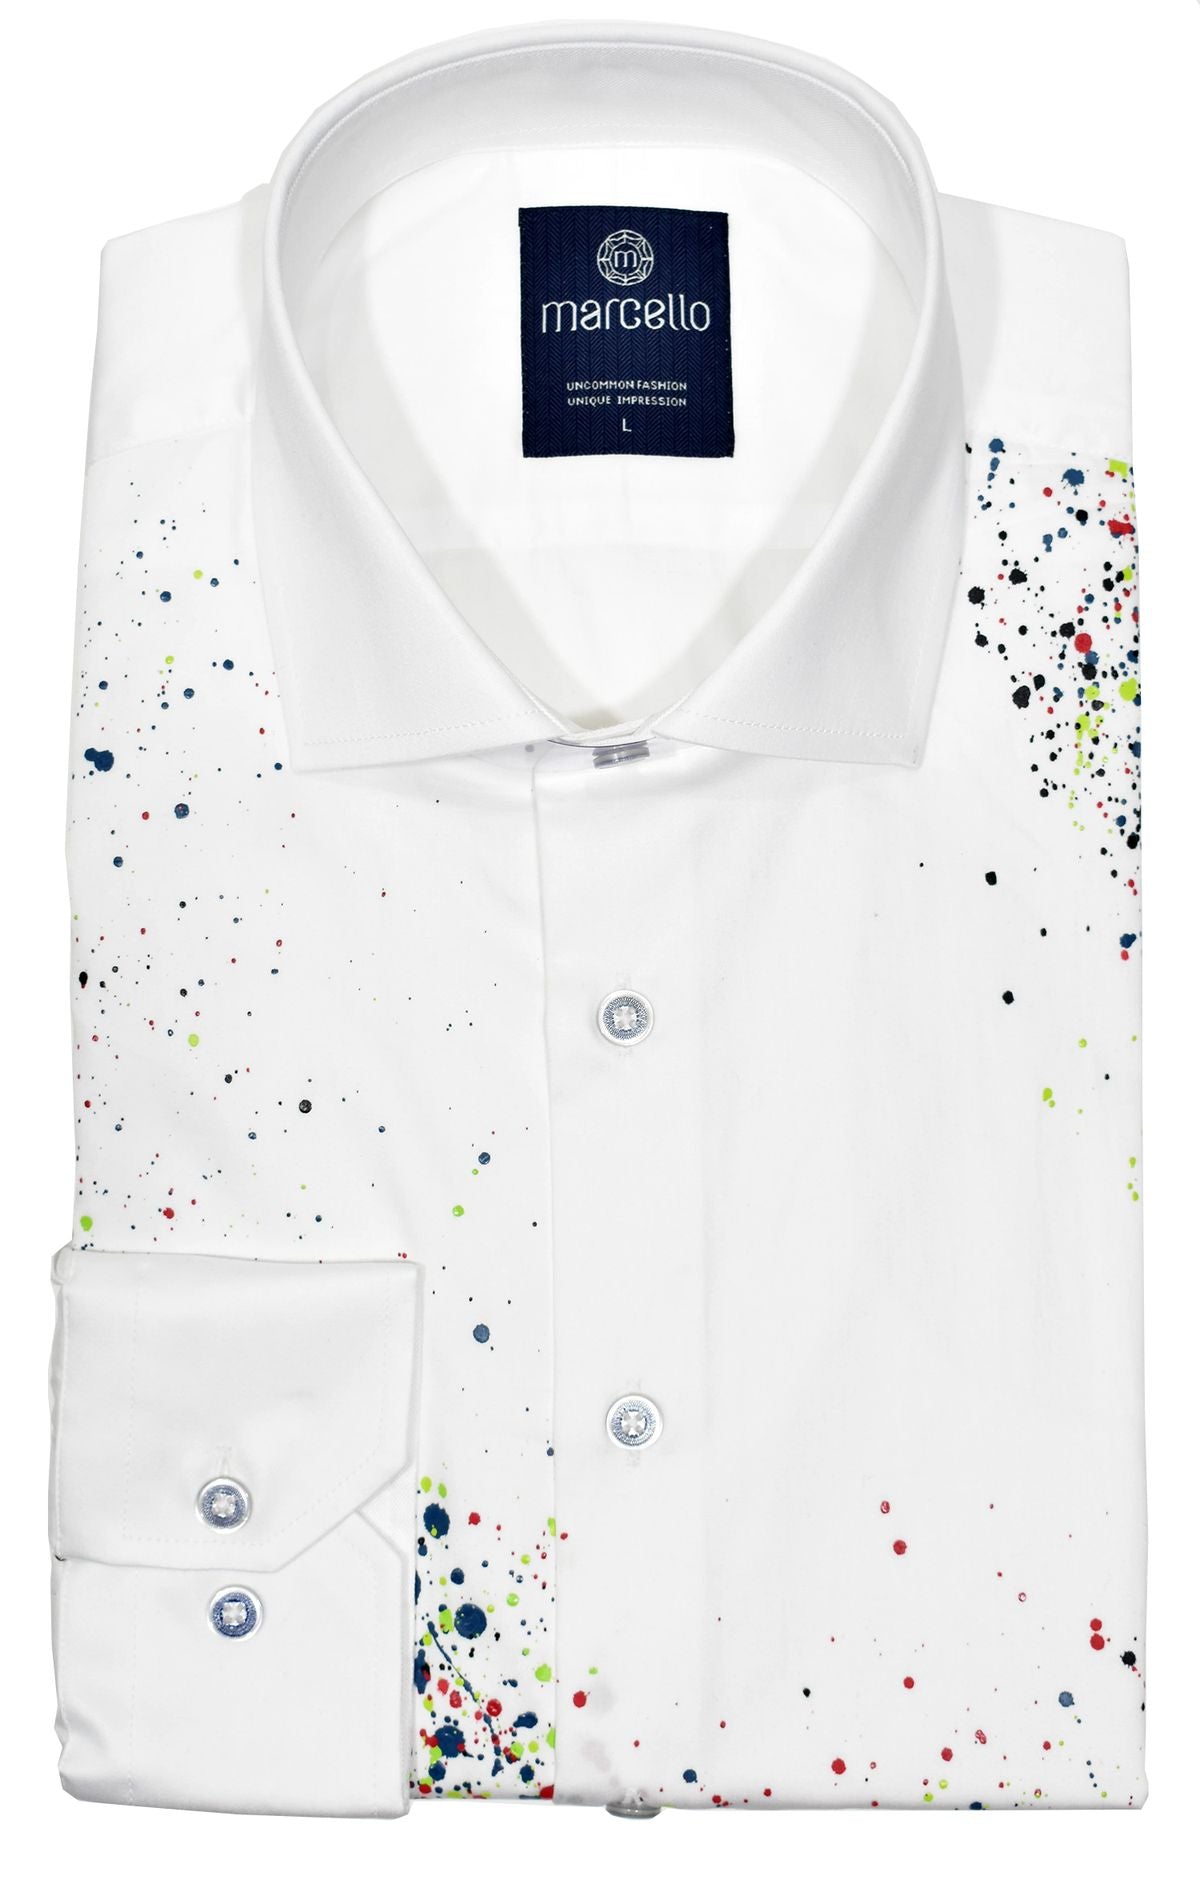 Our hand painted selection of shirts are like no other.   Each is hand painted by an artist on soft cotton sateen fabric, so no two are exact.   Truly unique and special.   Classic shaped fit.